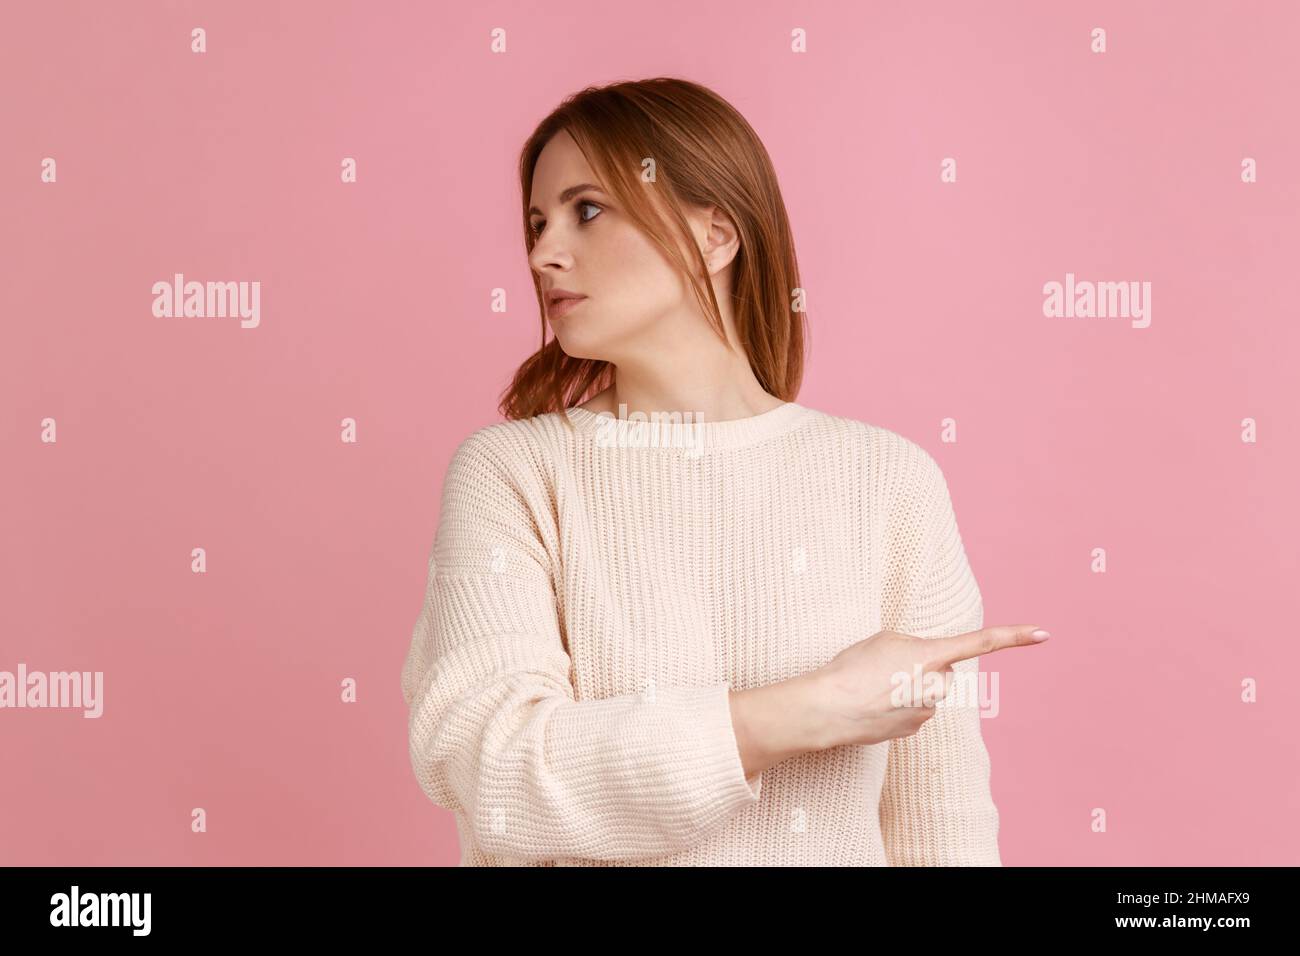 Go away. Portrait of blond woman showing exit, demanding to leave her alone, turning away with resentful irritated expression, wearing white sweater. Indoor studio shot isolated on pink background. Stock Photo